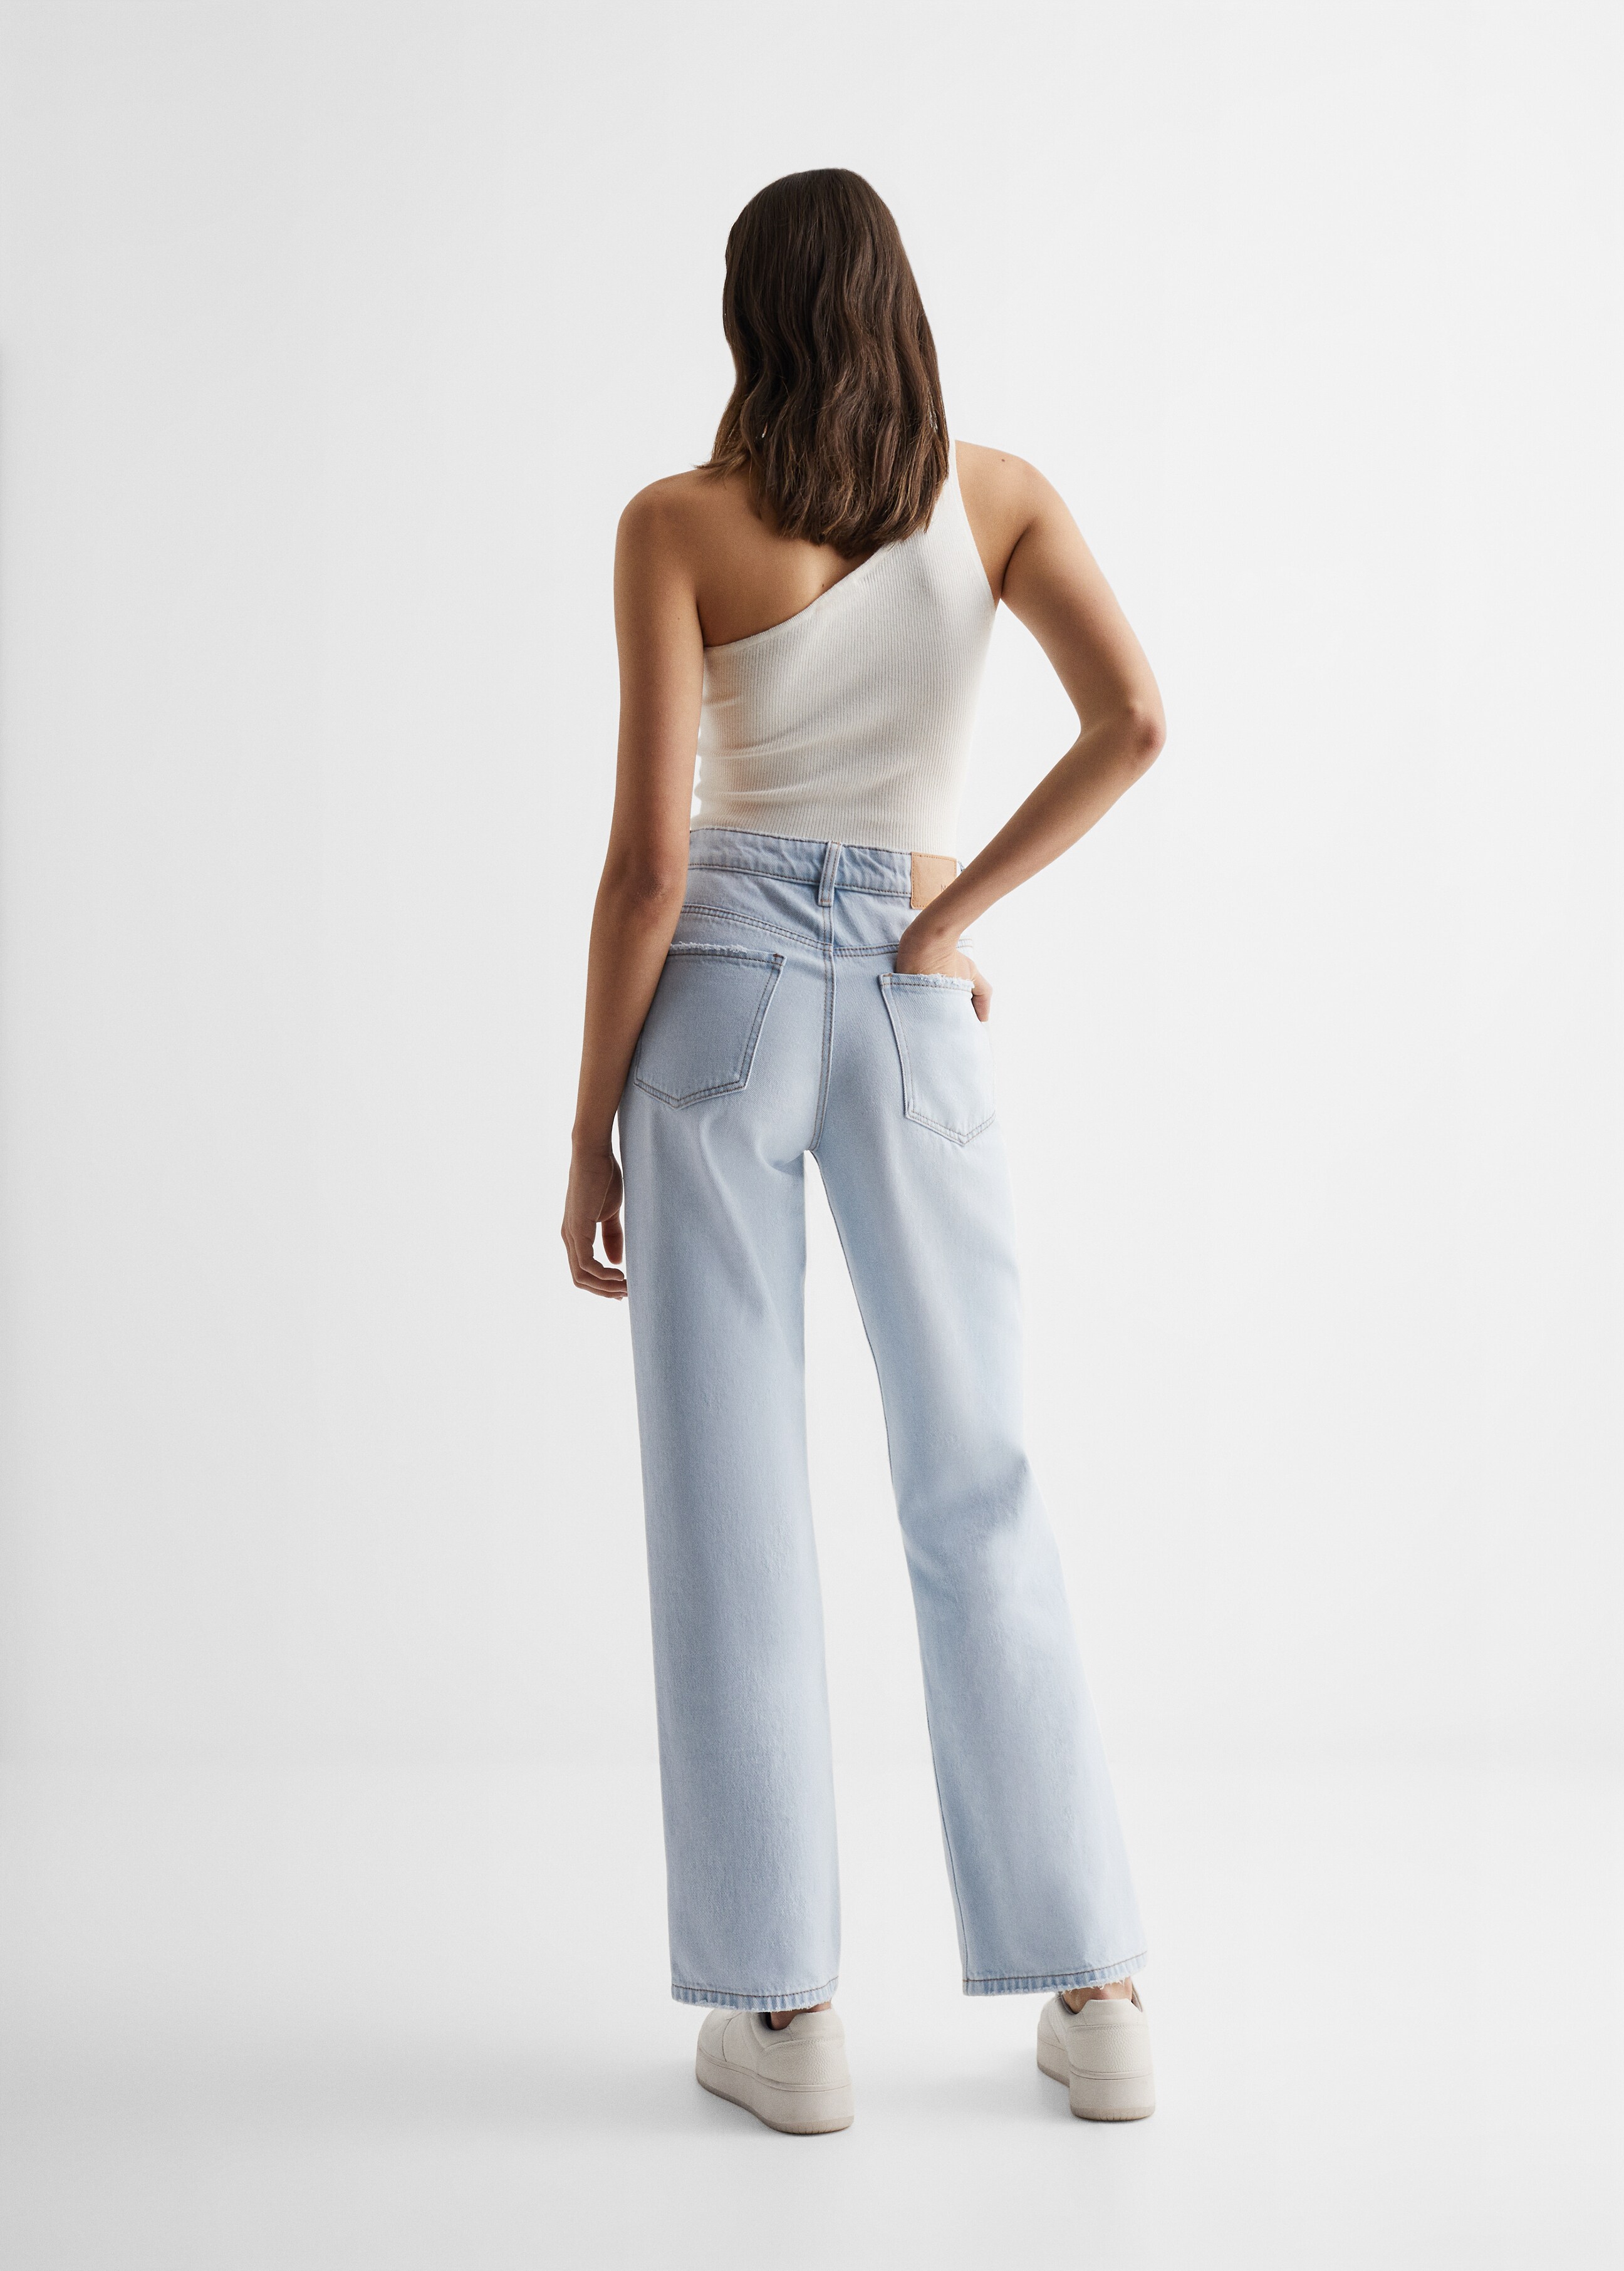 Decorative ripped wideleg jeans - Reverse of the article